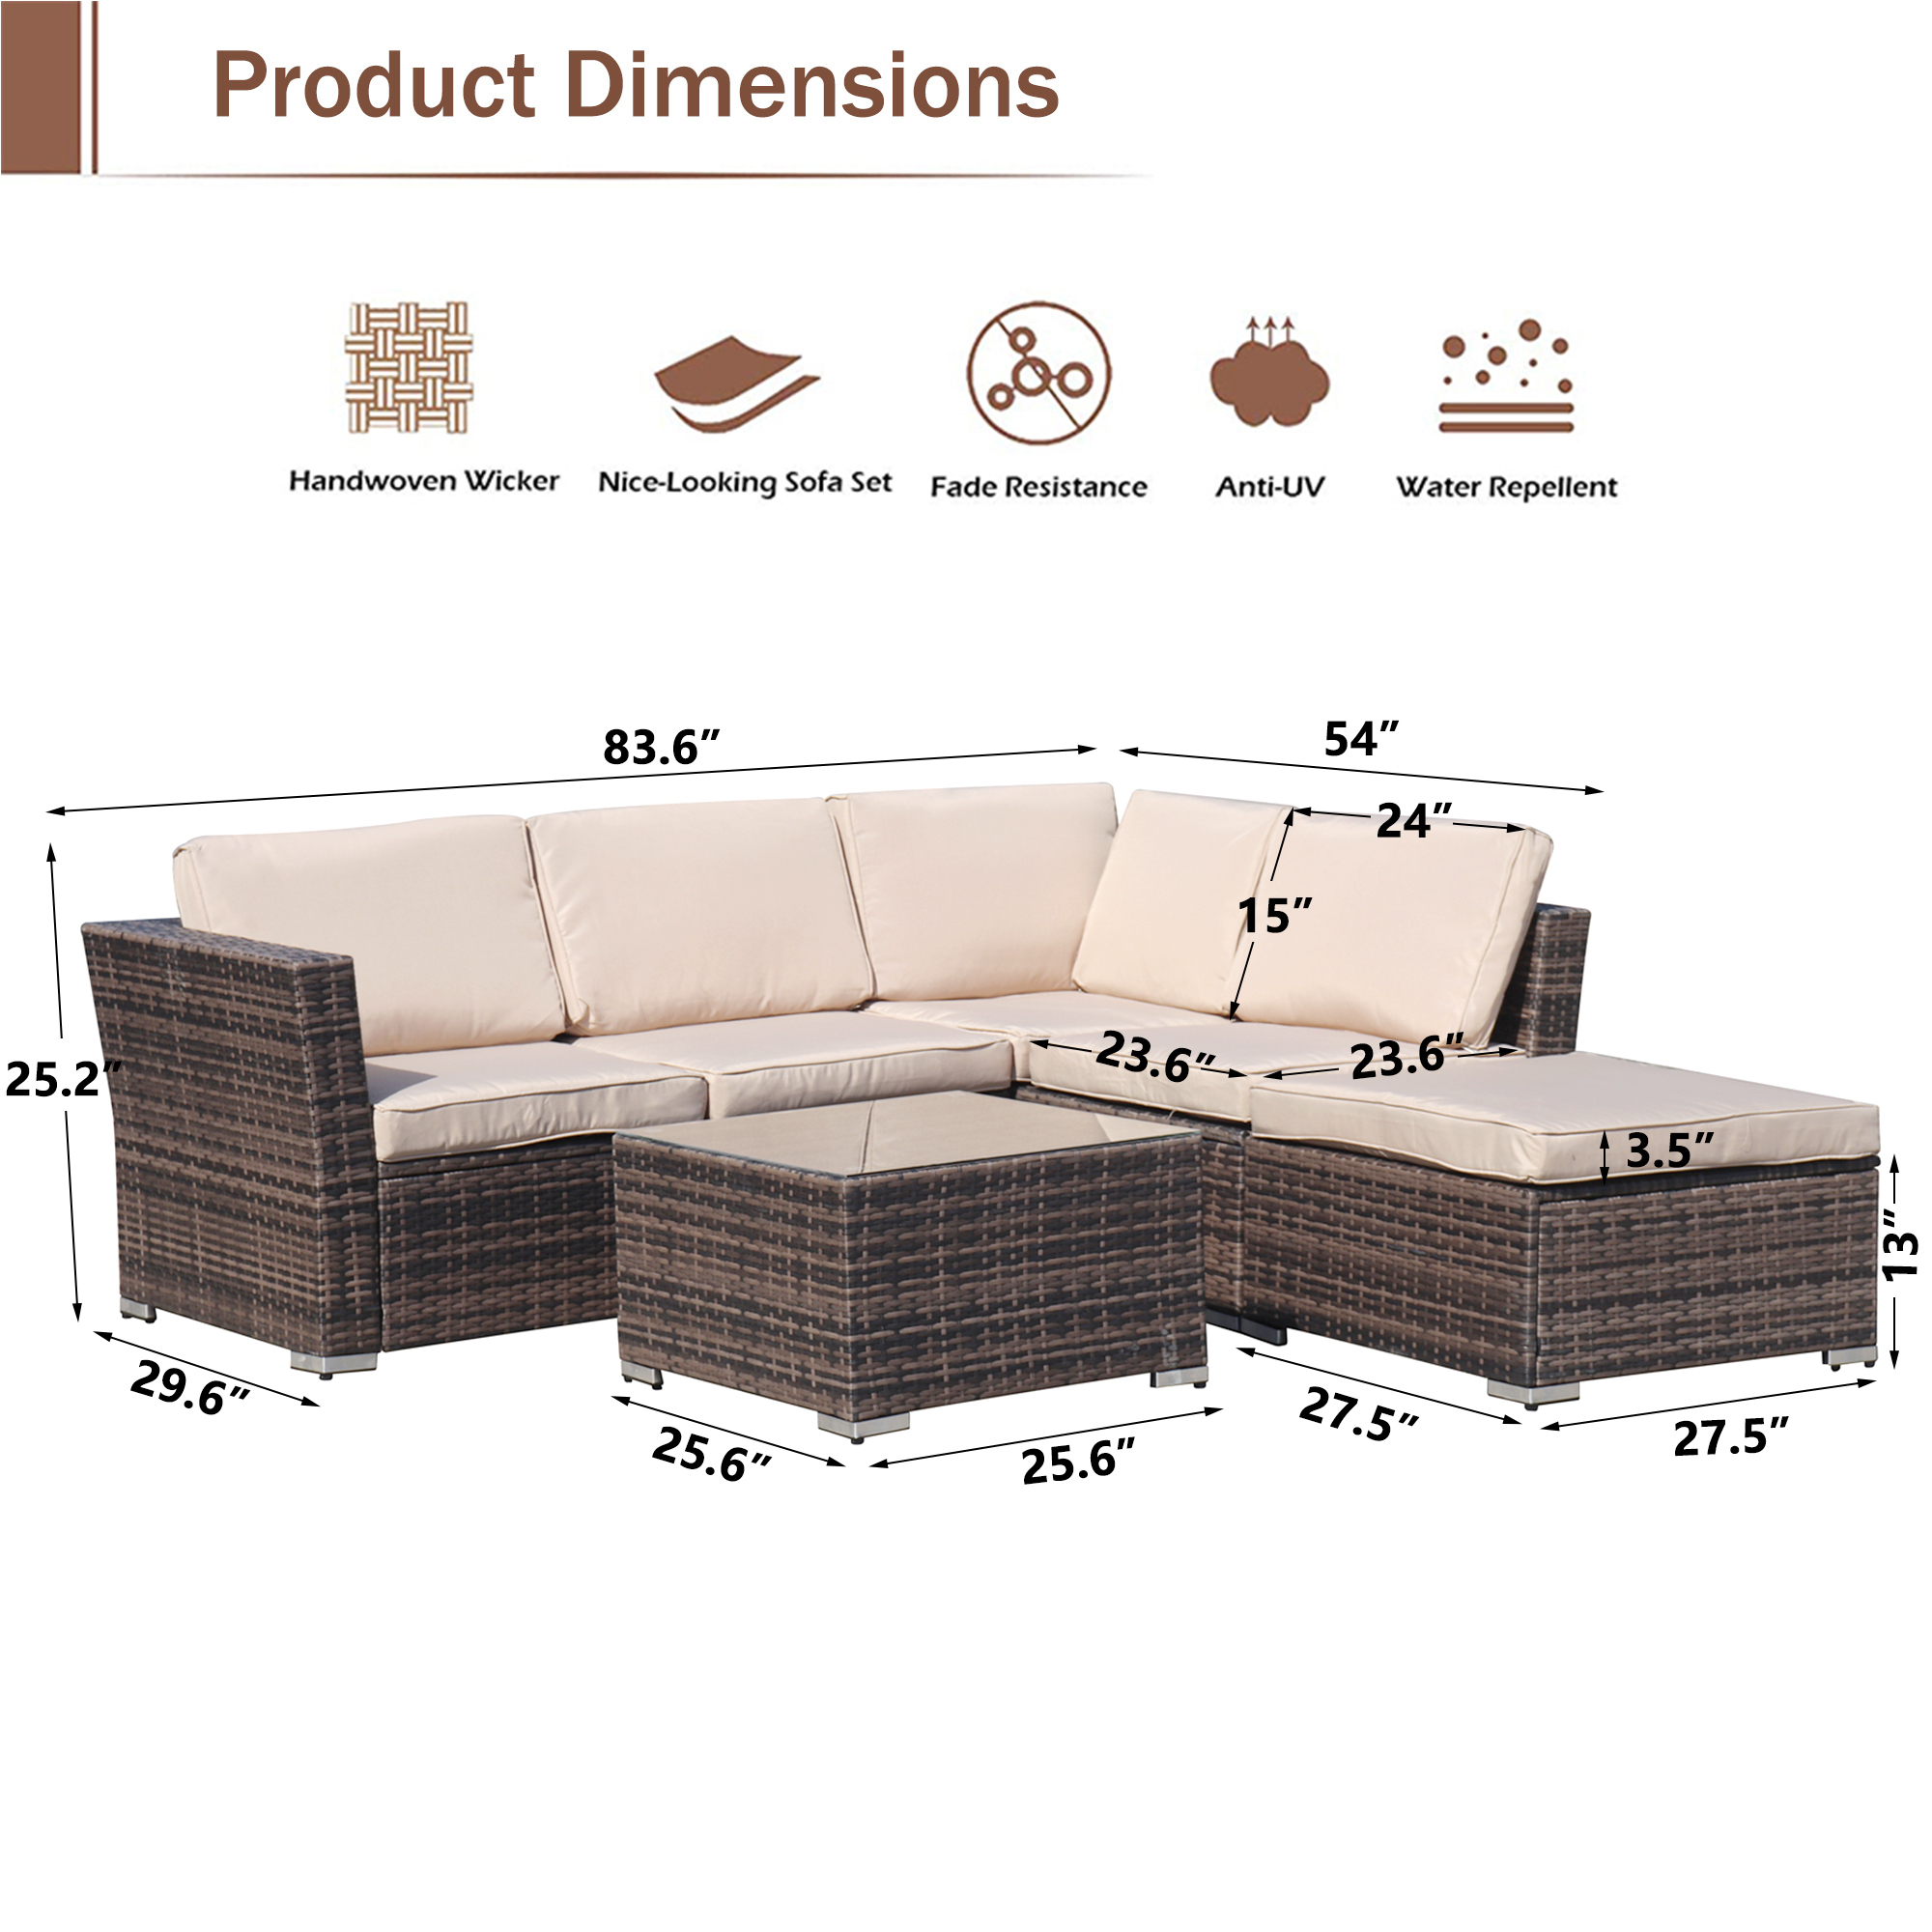 Outdoor Conversation Sets, 4 Piece Patio Furniture Sets with Loveseat Sofa, Lounge Chair, Wicker Chair, Coffee Table, Patio Sectional Sofa Set with Cushions for Backyard Garden Pool, LLL1326 - image 5 of 9